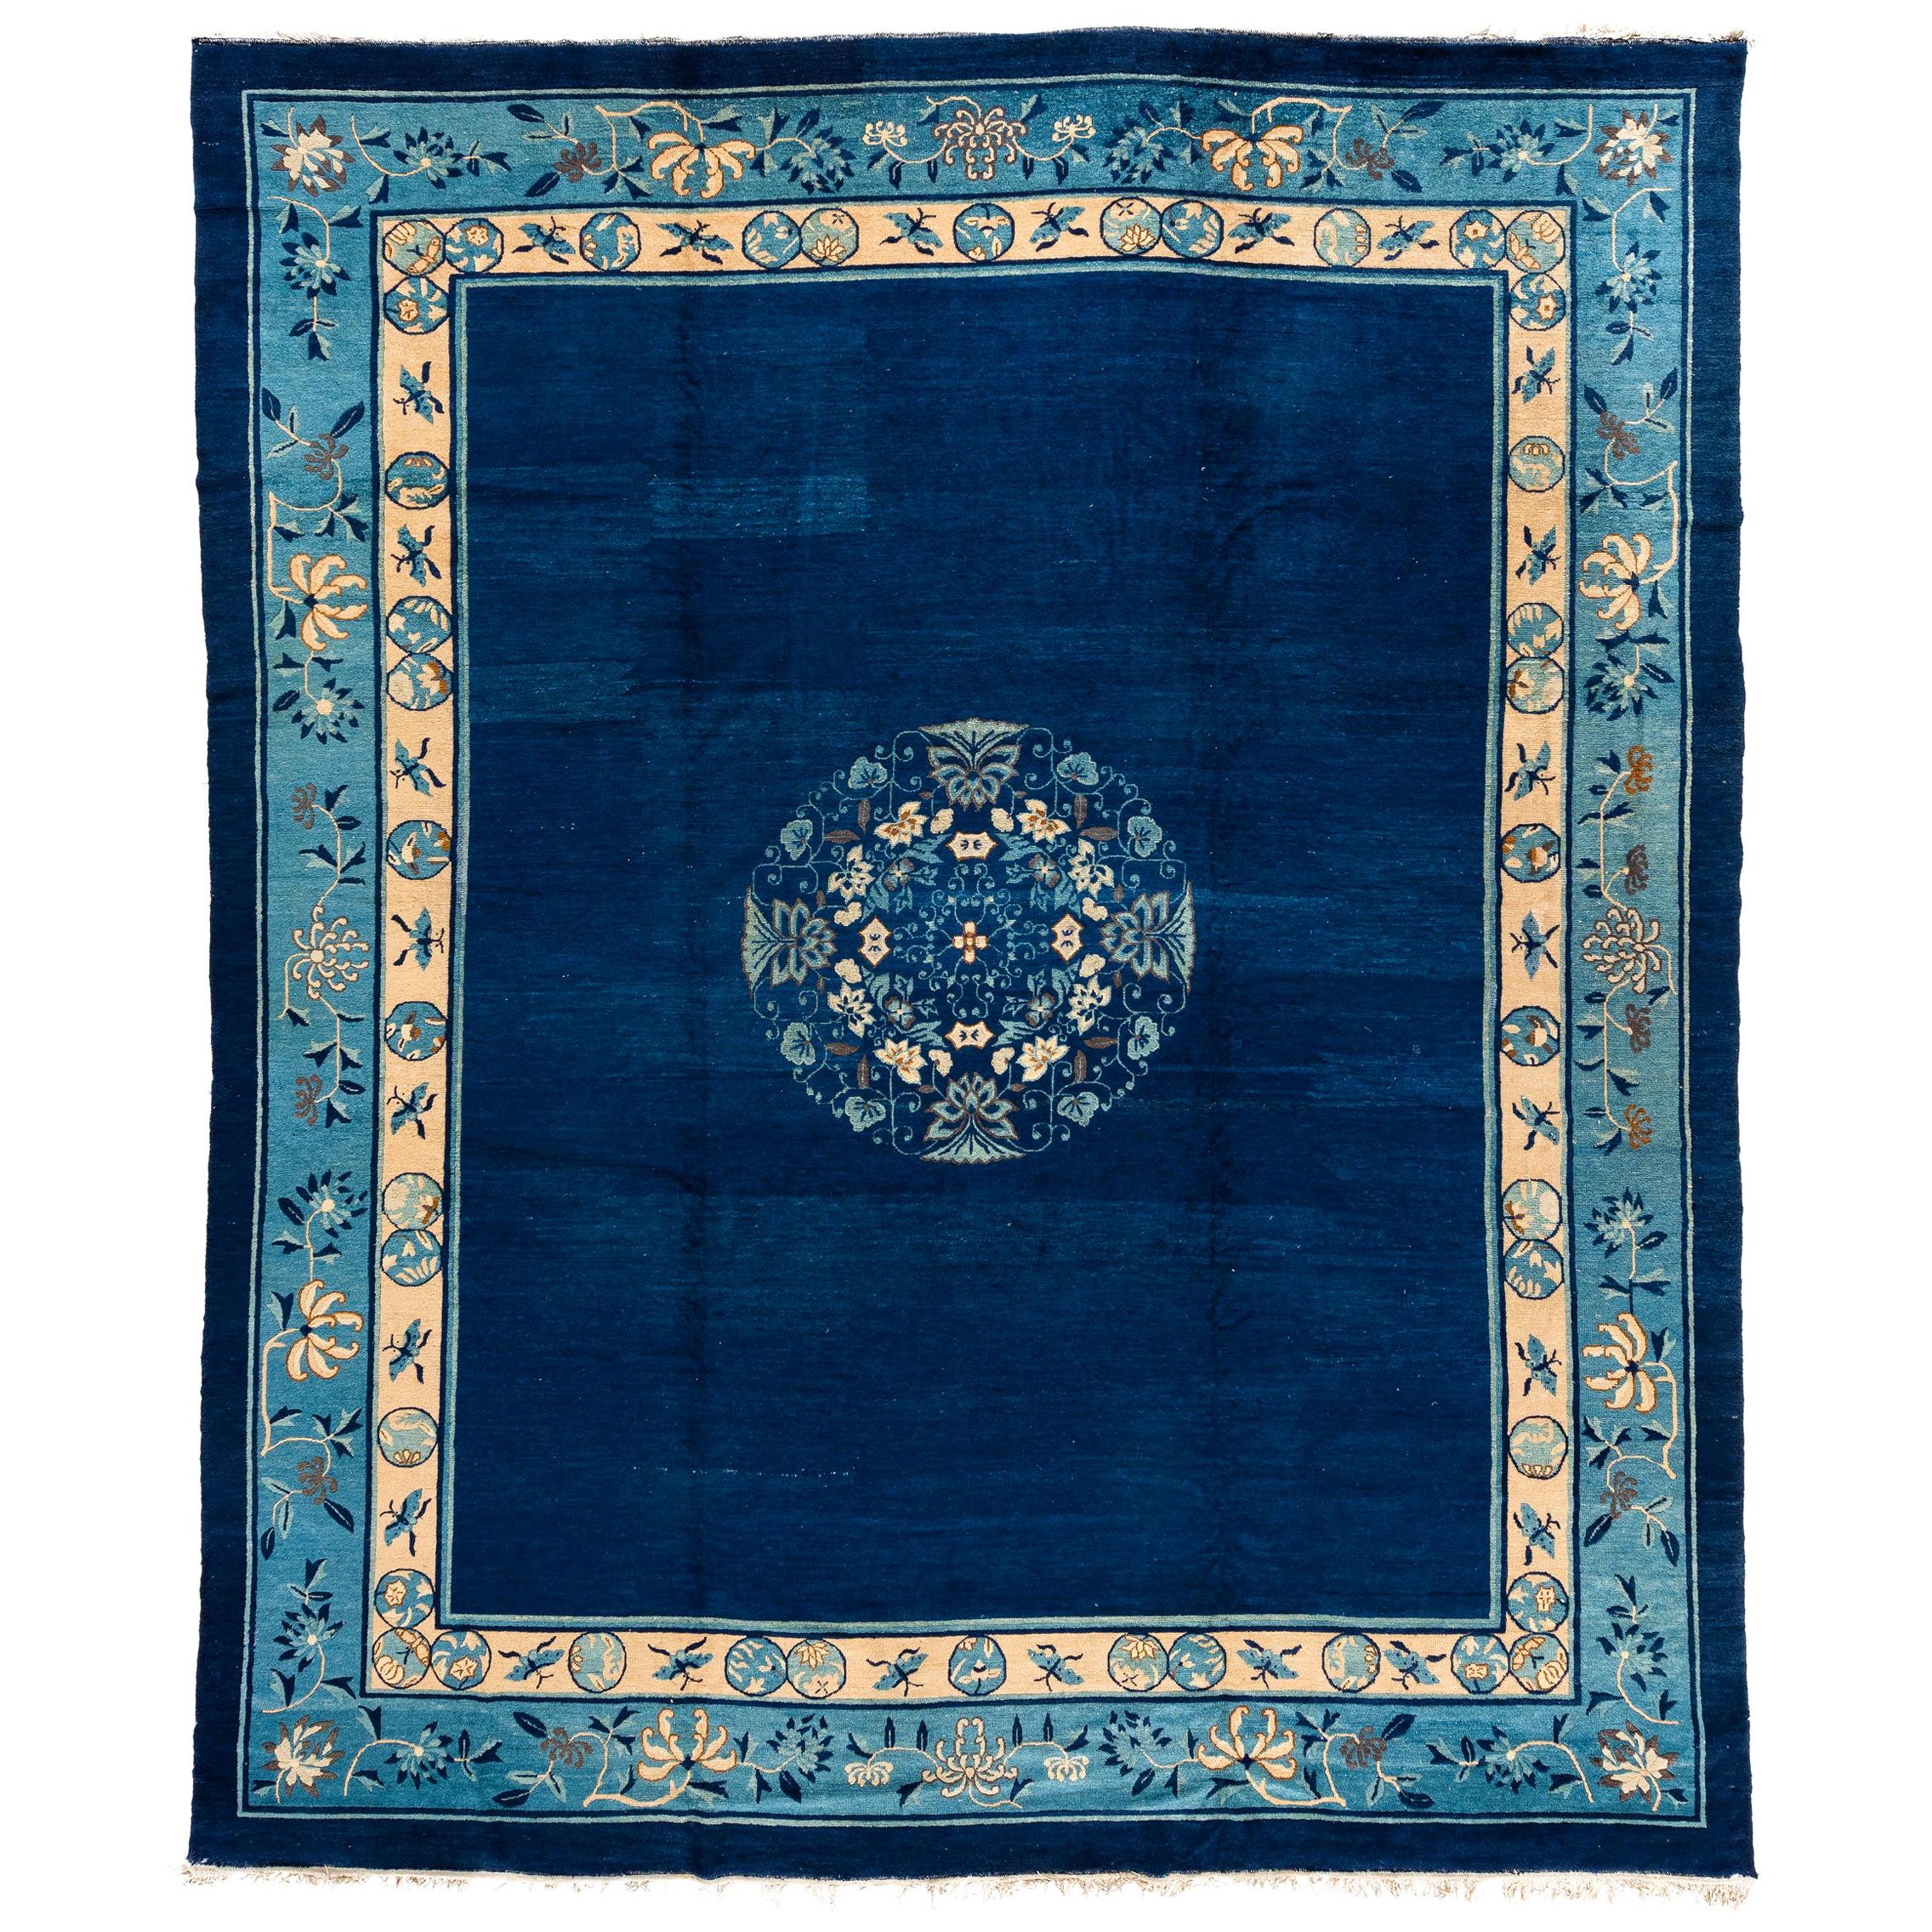 Antique Chinese Rug with Plain Blue Field with Patterned Borders and Butterflies For Sale